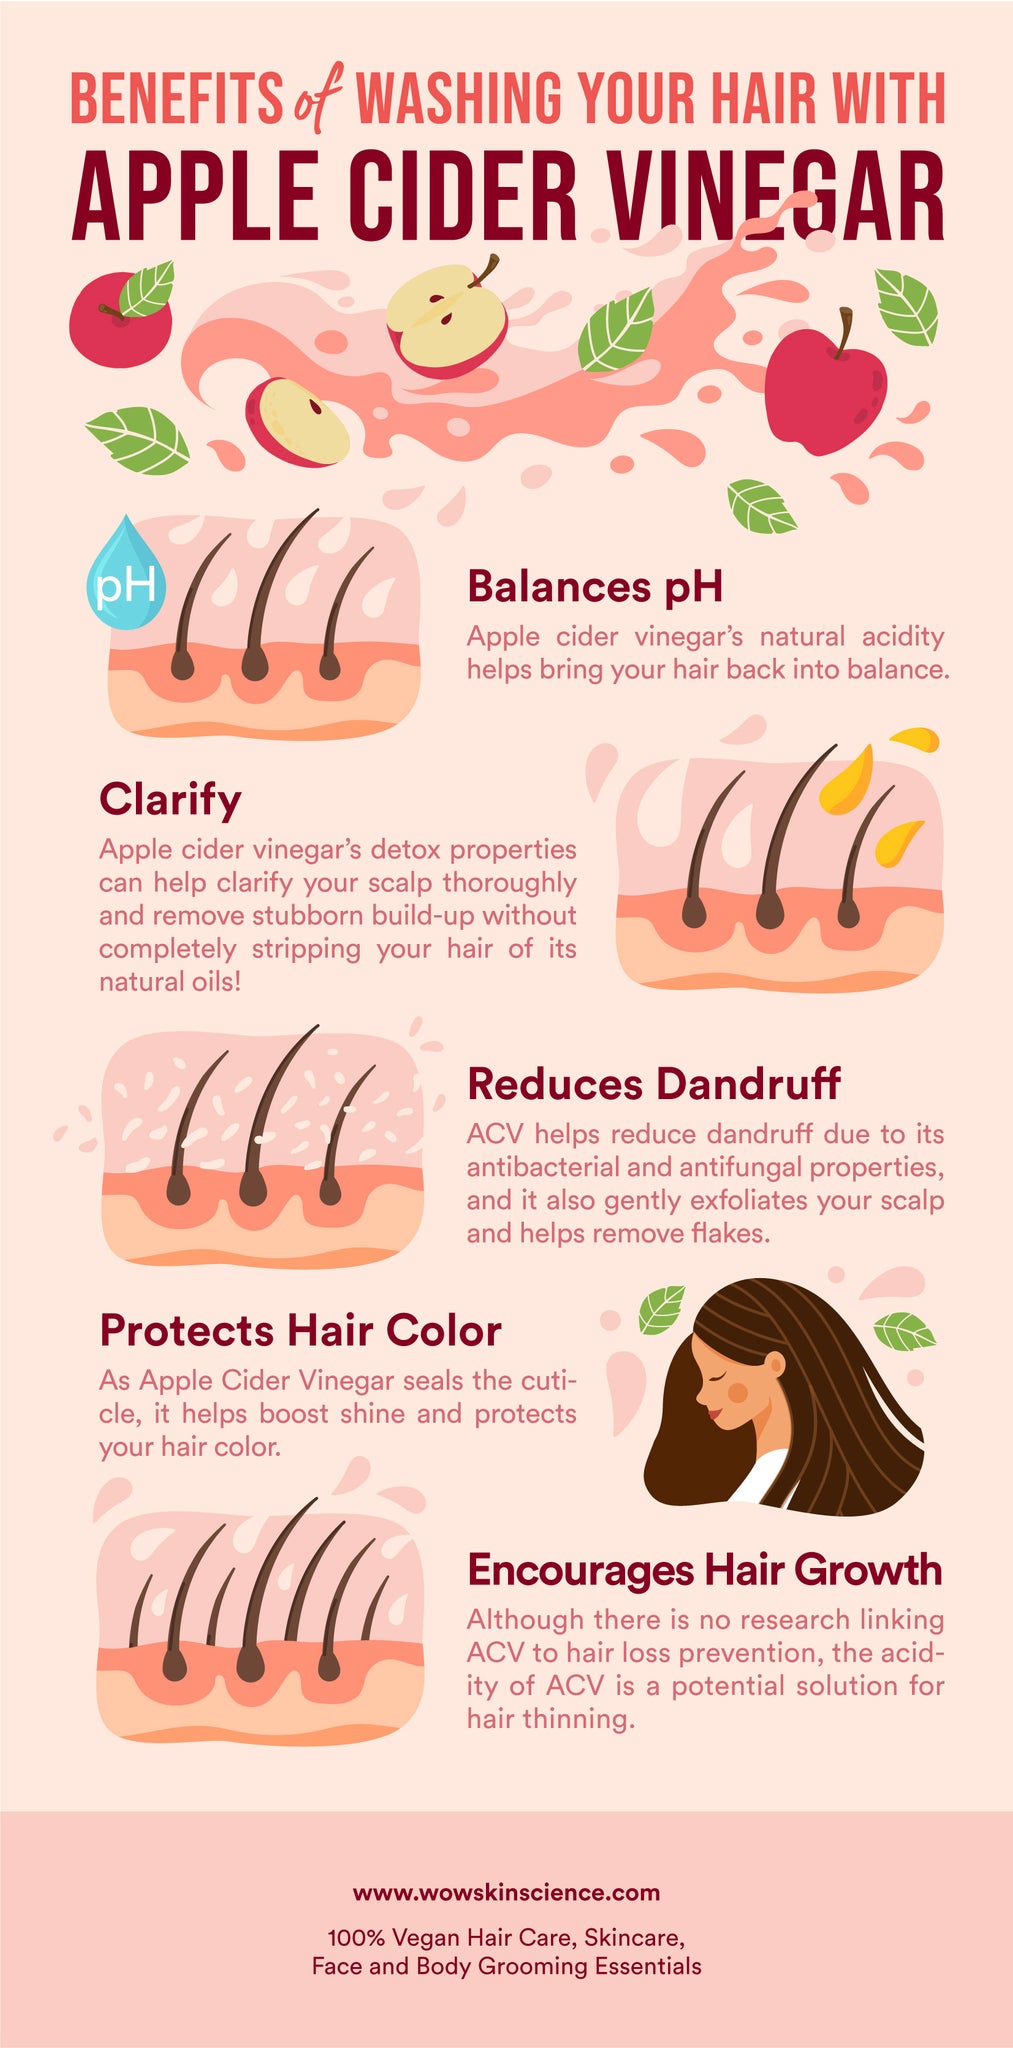 How To Use Apple Cider Vinegar For Your Hair